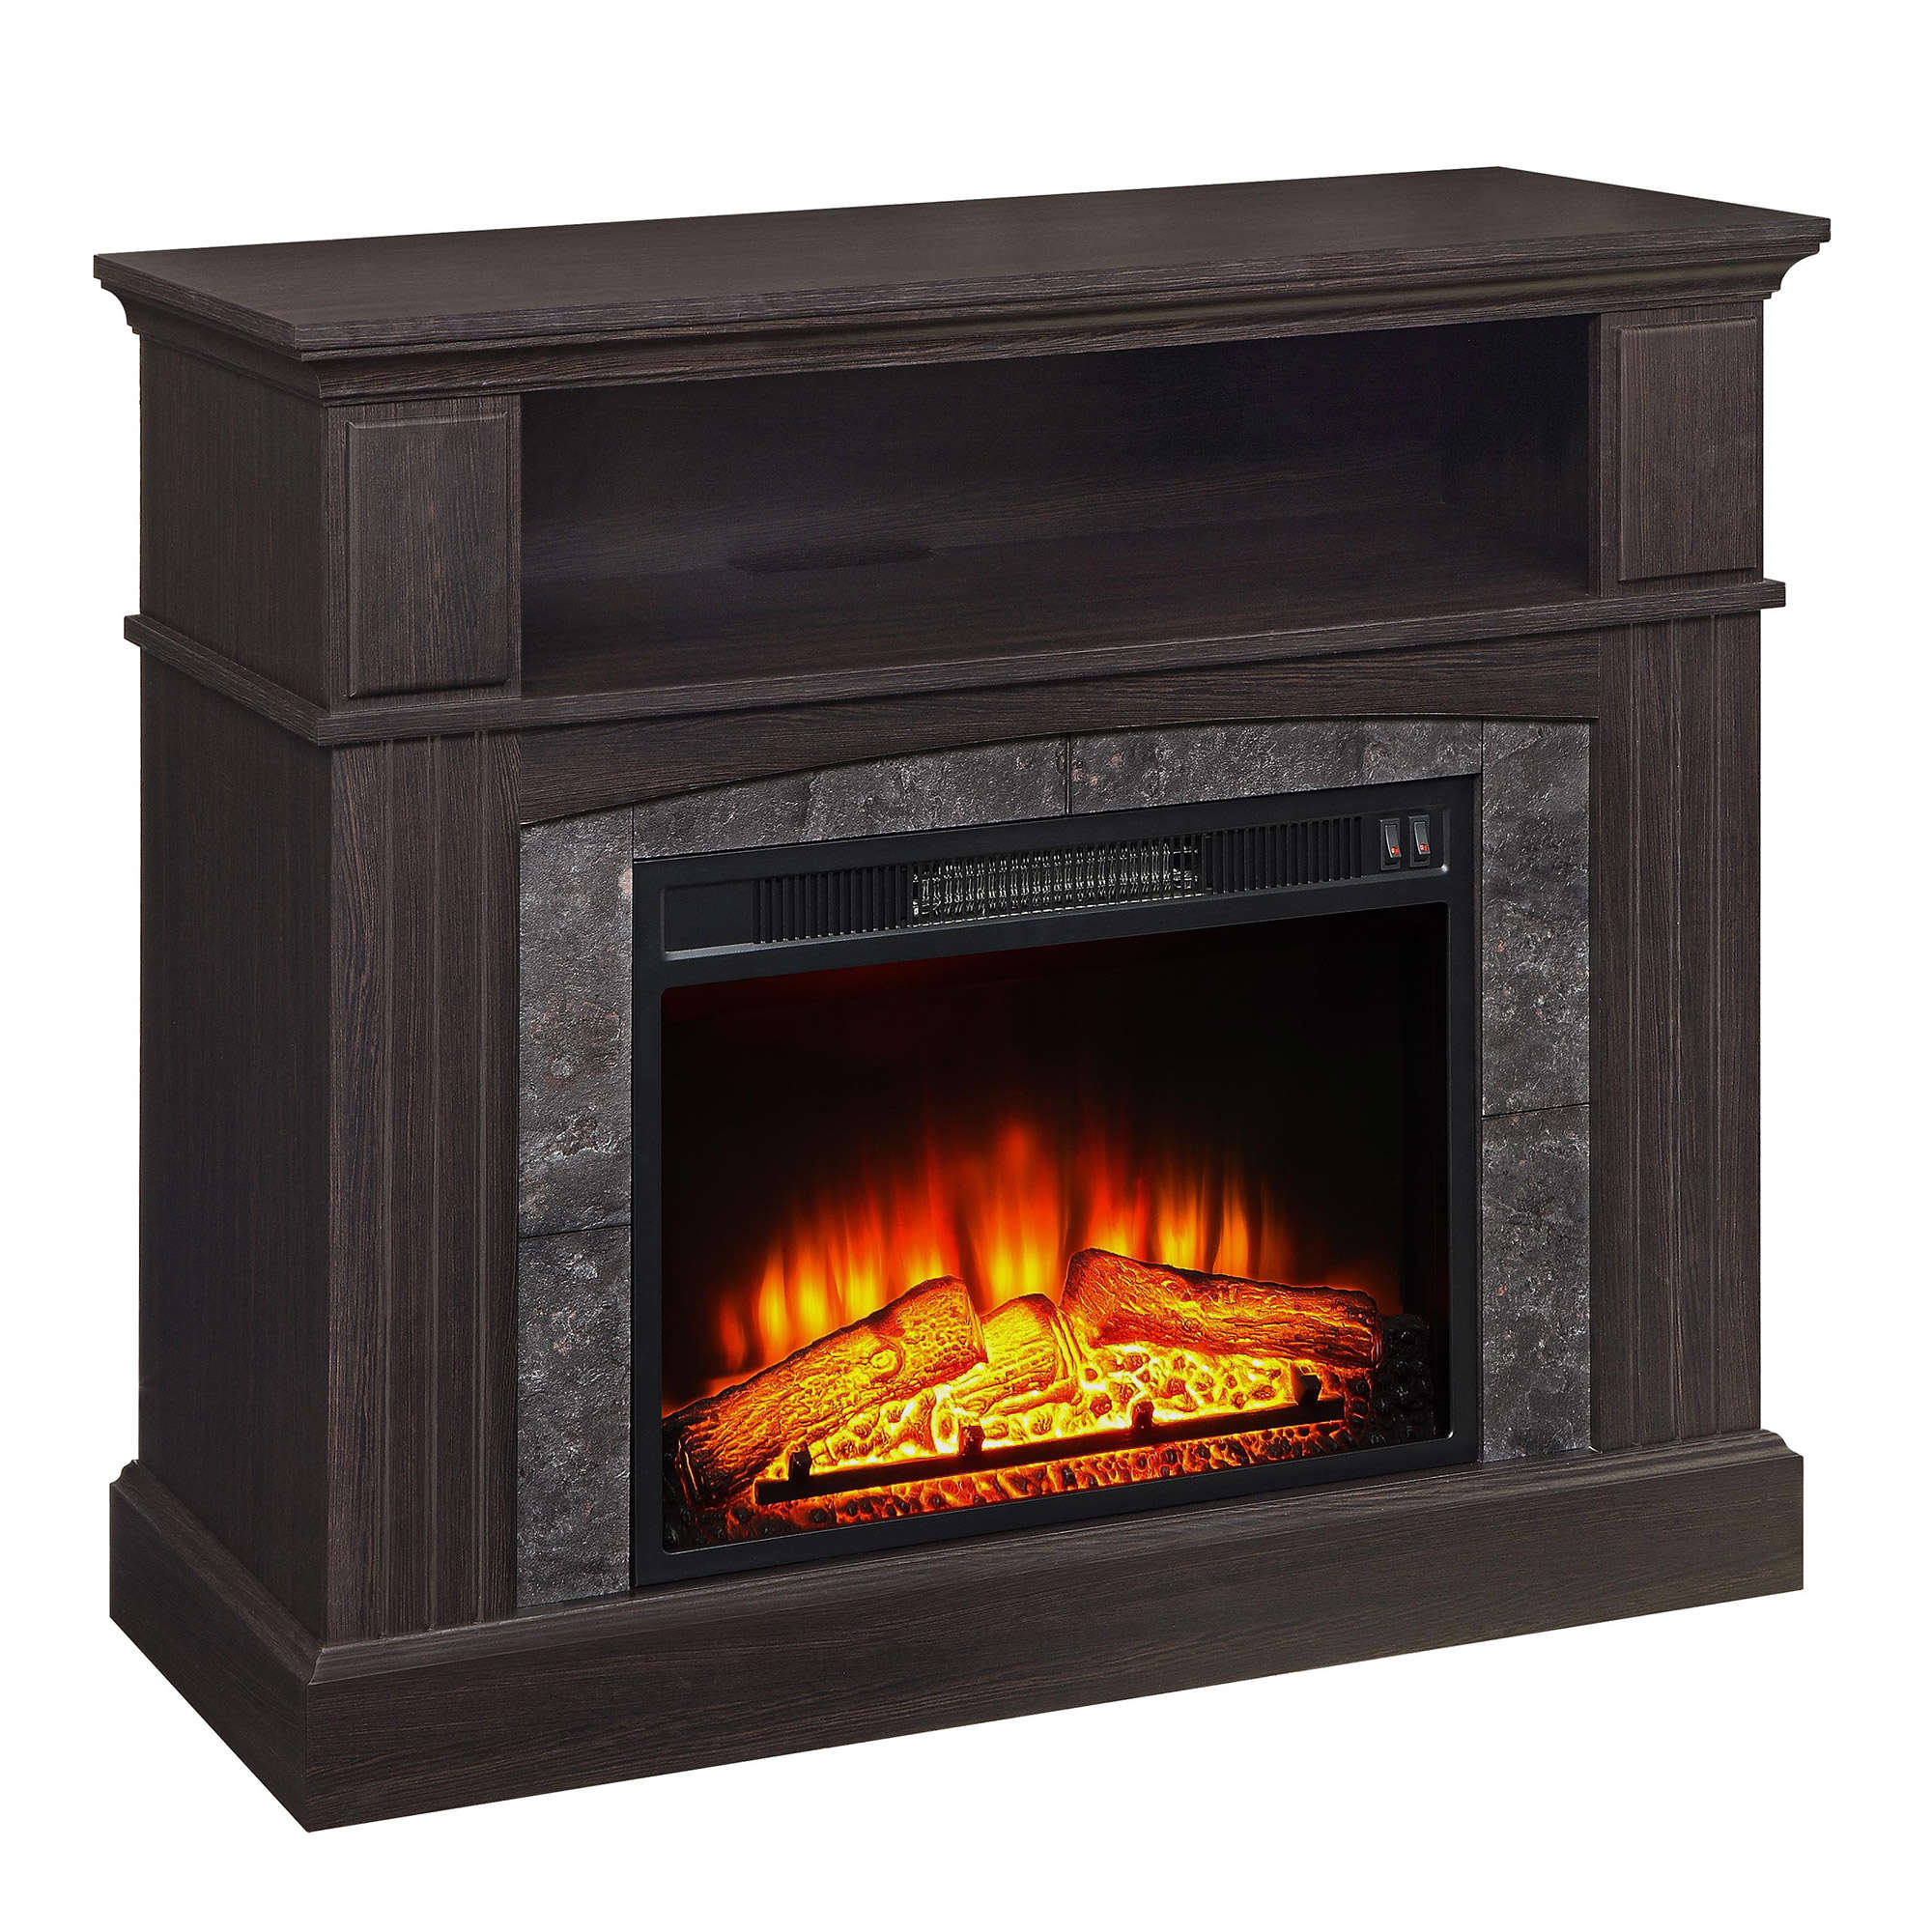 Whalen Media Fireplace for Your Home Television Stand fits TVs up to 50" Espresso Finish - image 3 of 5